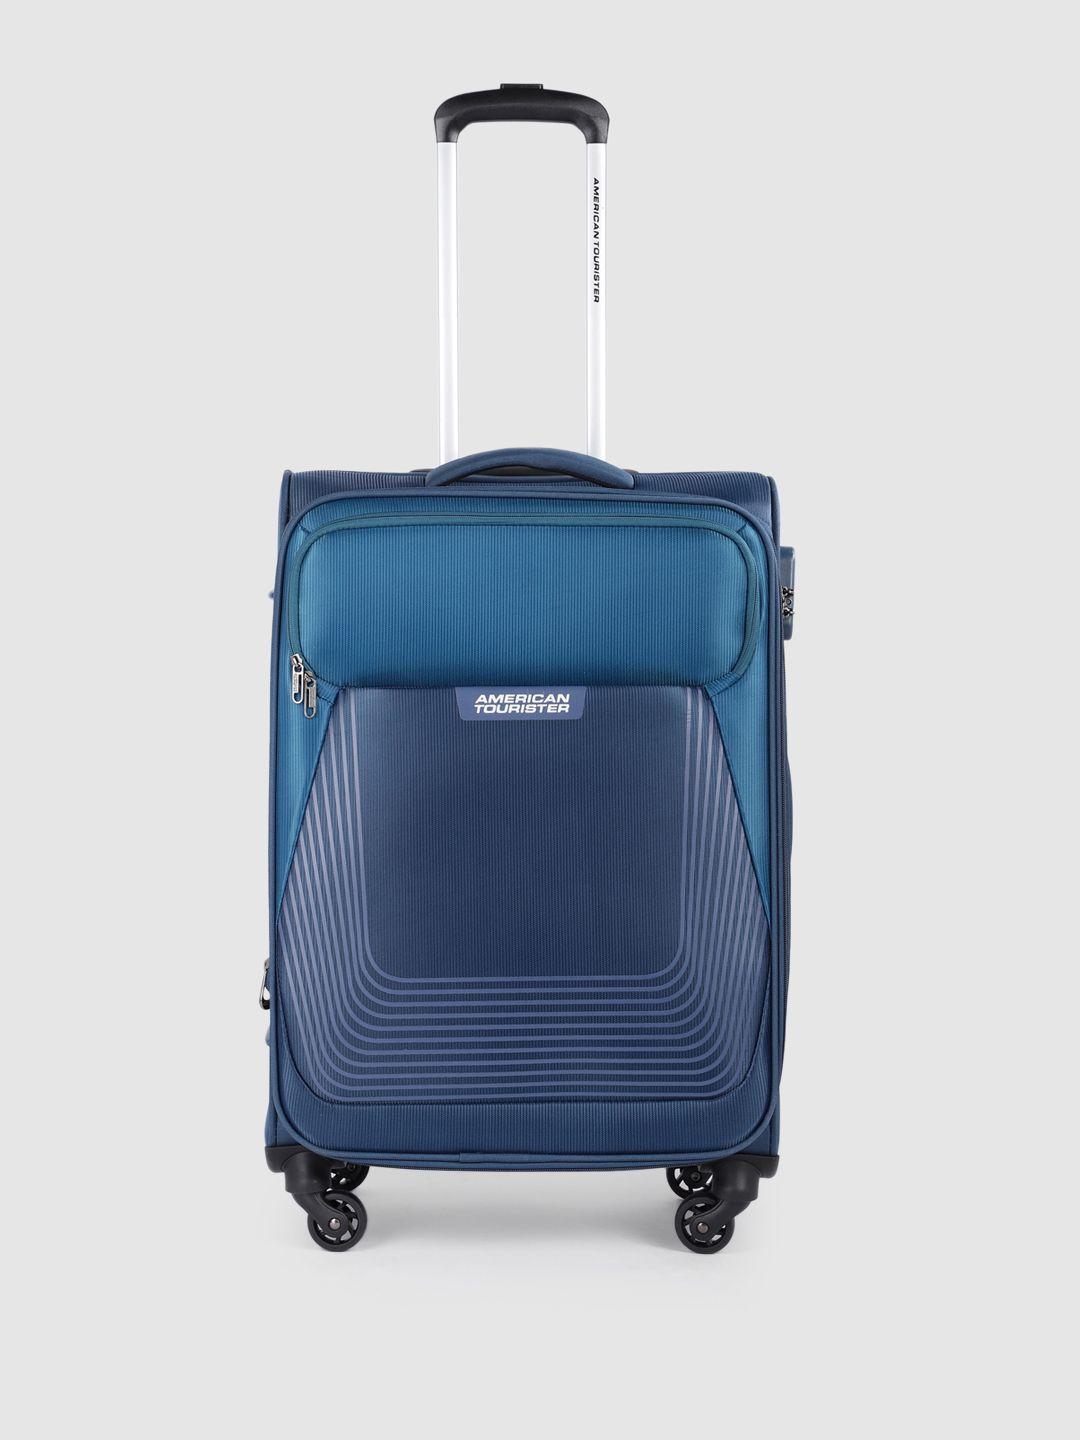 american tourister southside lite medium trolley suitcase